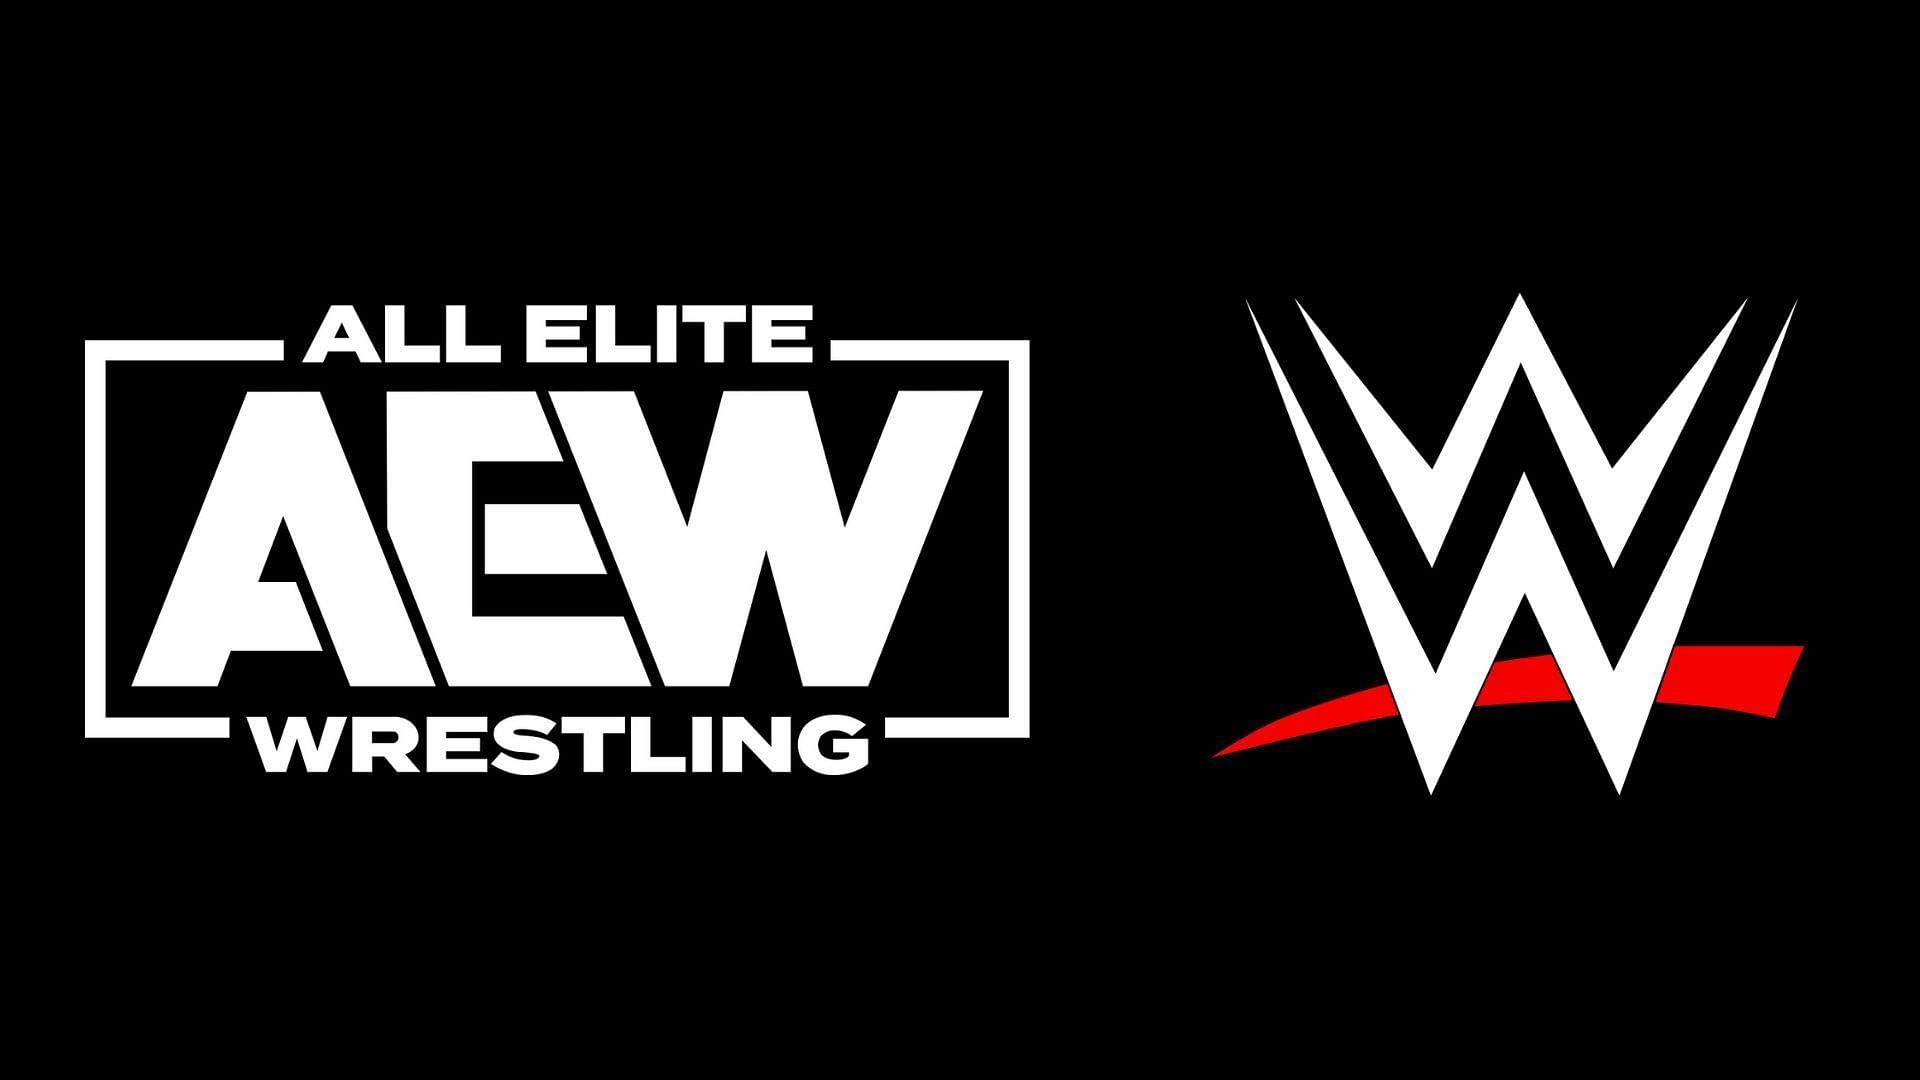 AEW is getting the talents of another WWE name